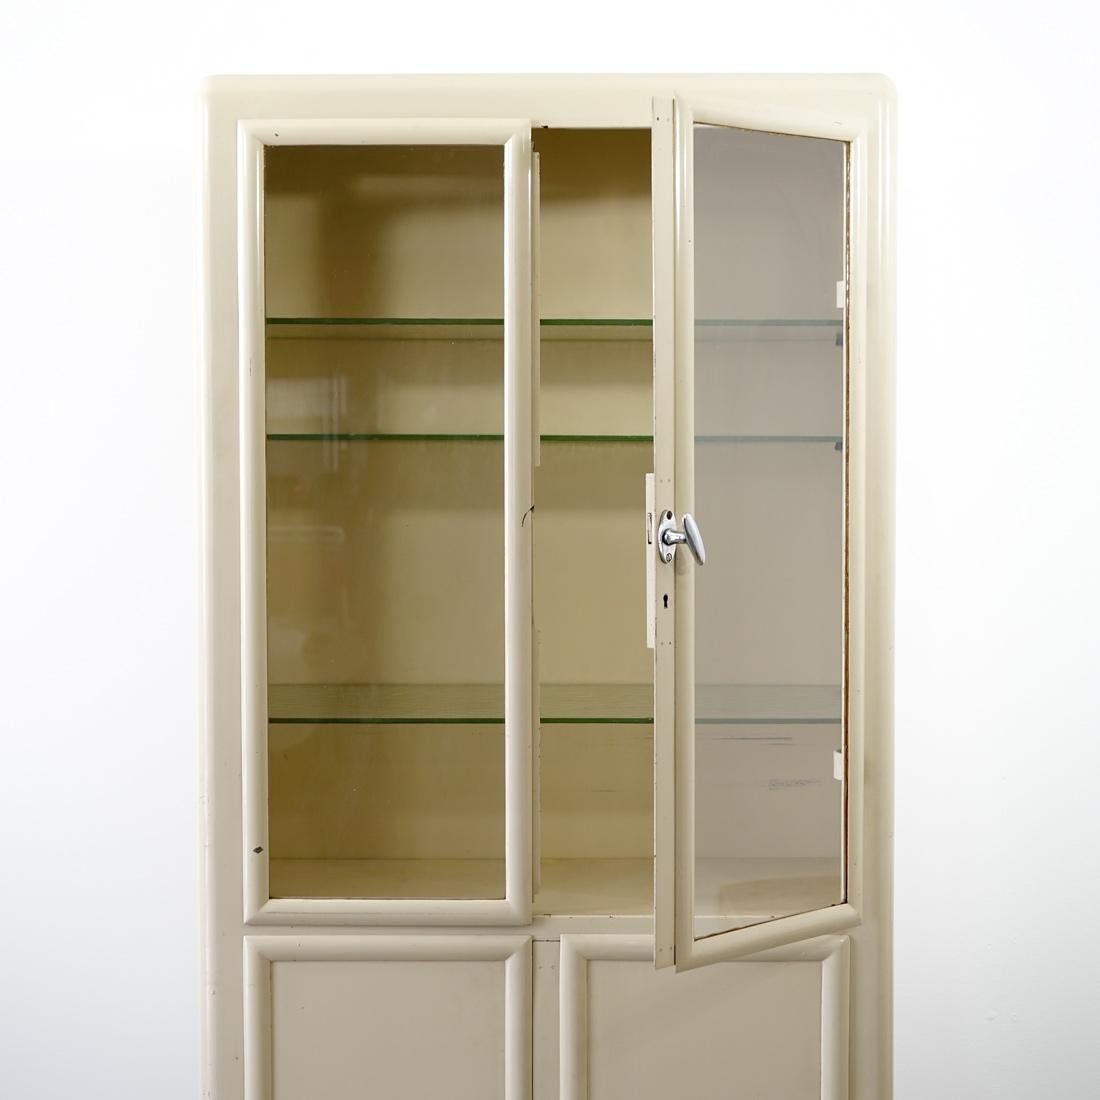 This lacquered steel medicine cabinet comes from the doctor's room of the former metalware manufacturing factory Mewa, Switzerland. 
Two glass shelves and four doors that can be opened separately, including the two upper ones in glass, allow for a